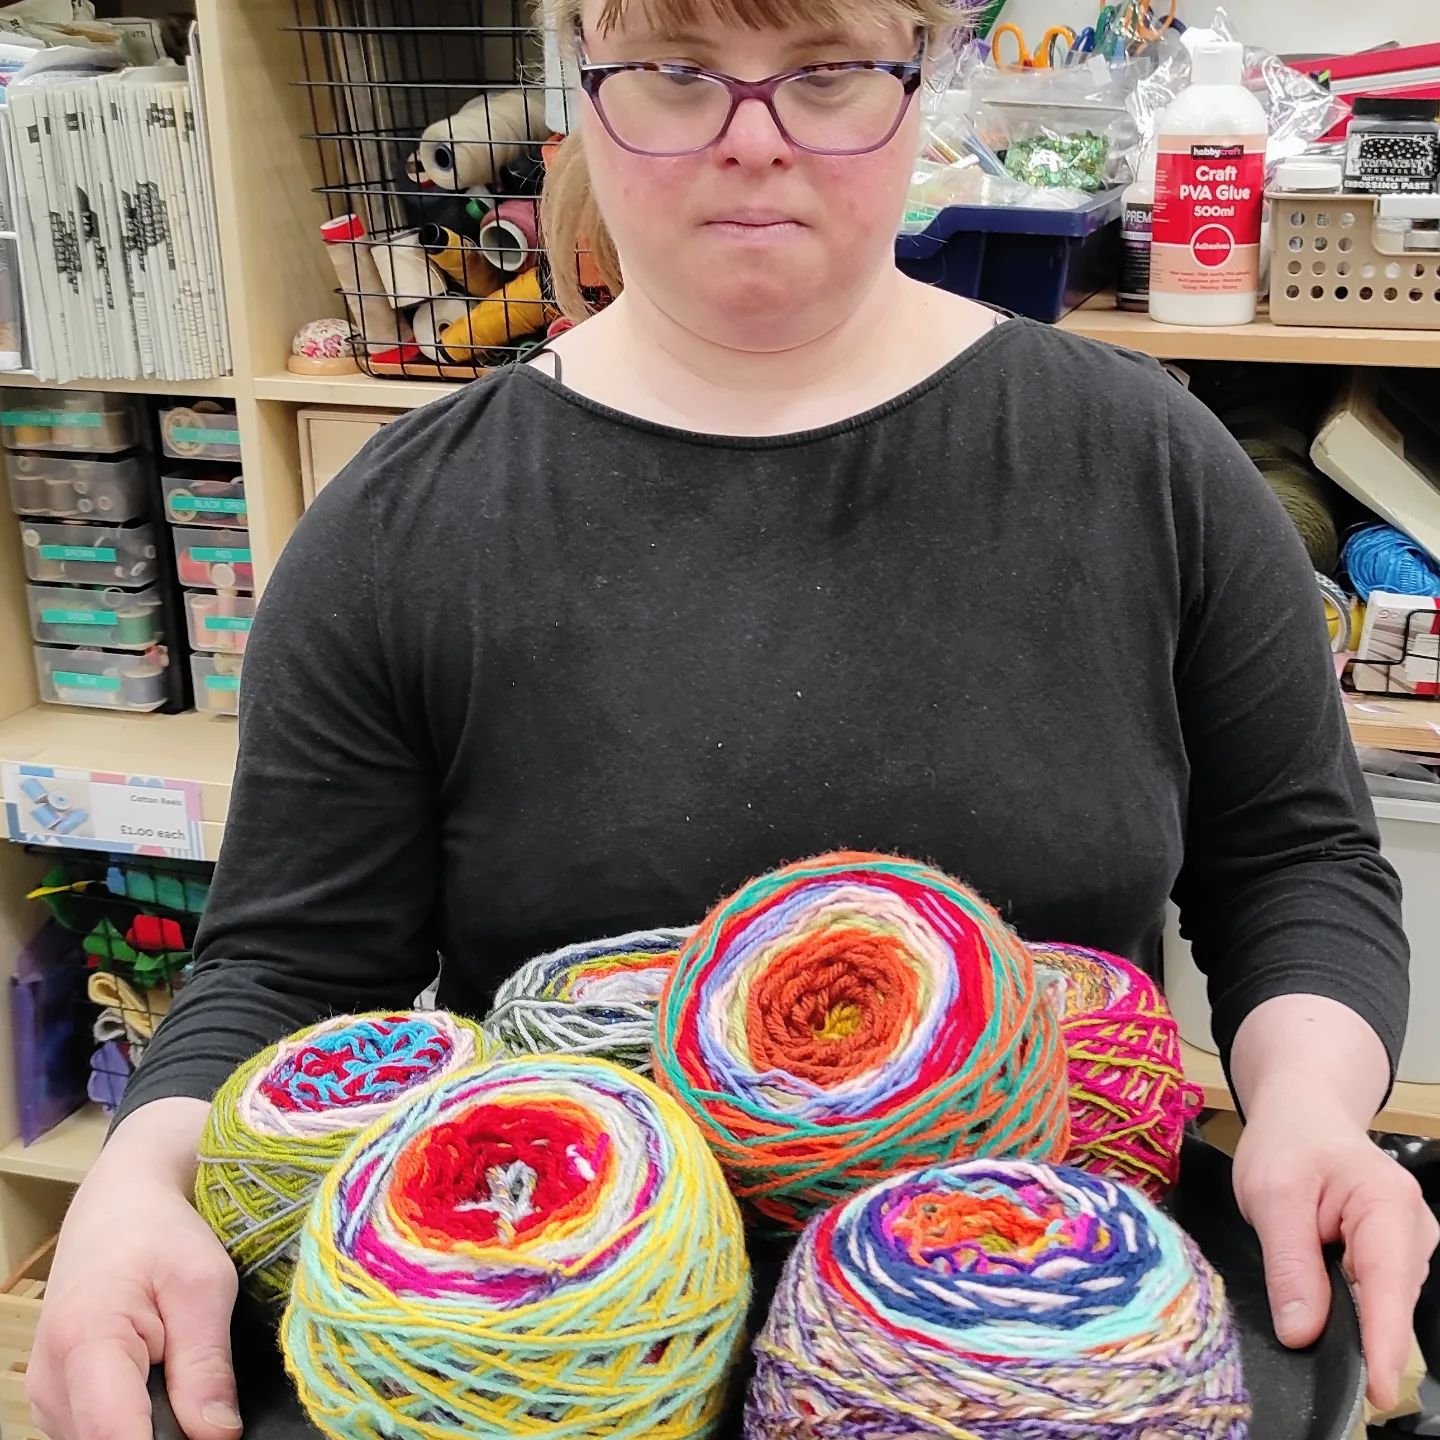 Please help yourself to our lovely yarn cakes. They have been beautifully made and presented by our Trainees #yarn #tarn cakes #knitting #crochetinspiration #grannysquare #grannyblanket #wool #scrapwool #scrapmaterial #scrapstoreyeovil #thehubscrapst